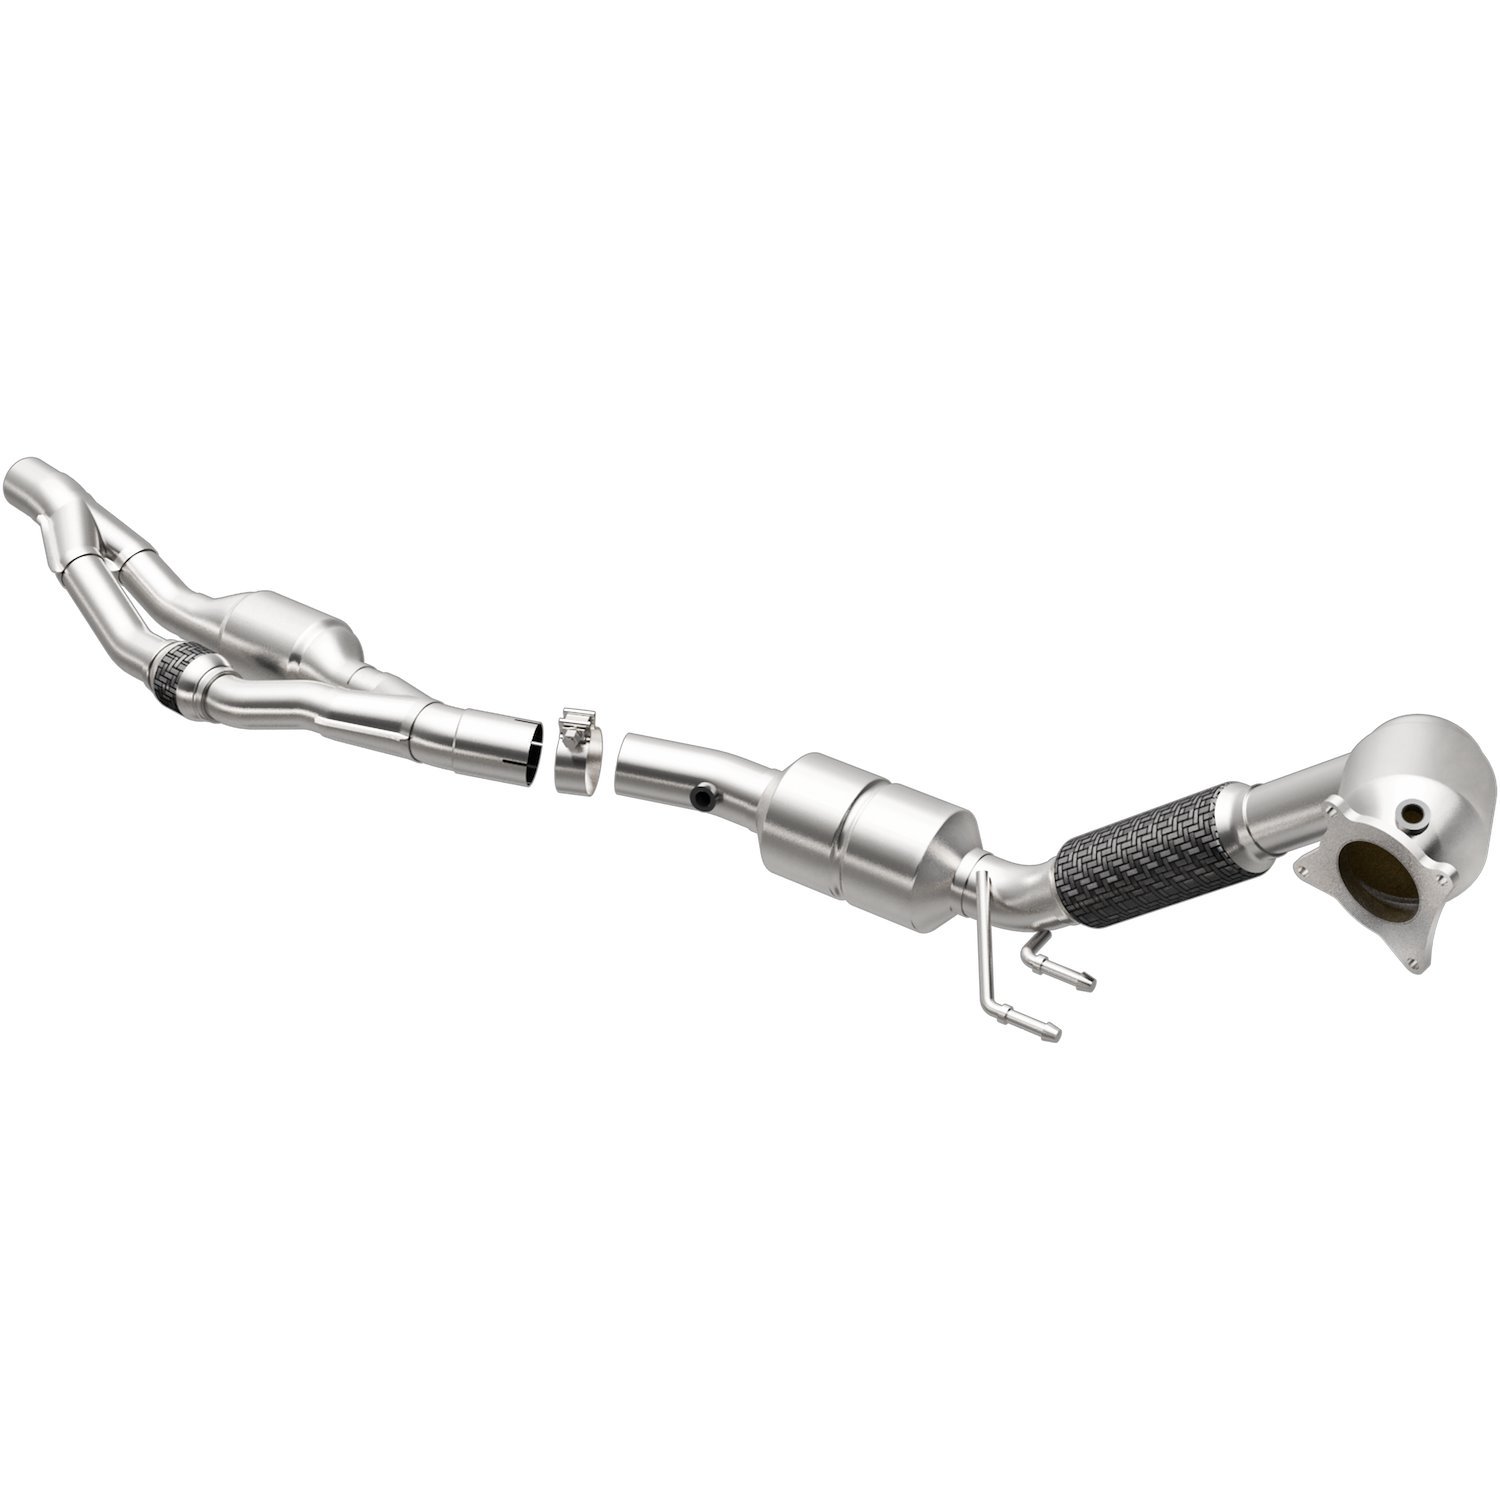 California Grade CARB Compliant Direct-Fit Catalytic Converter 551715